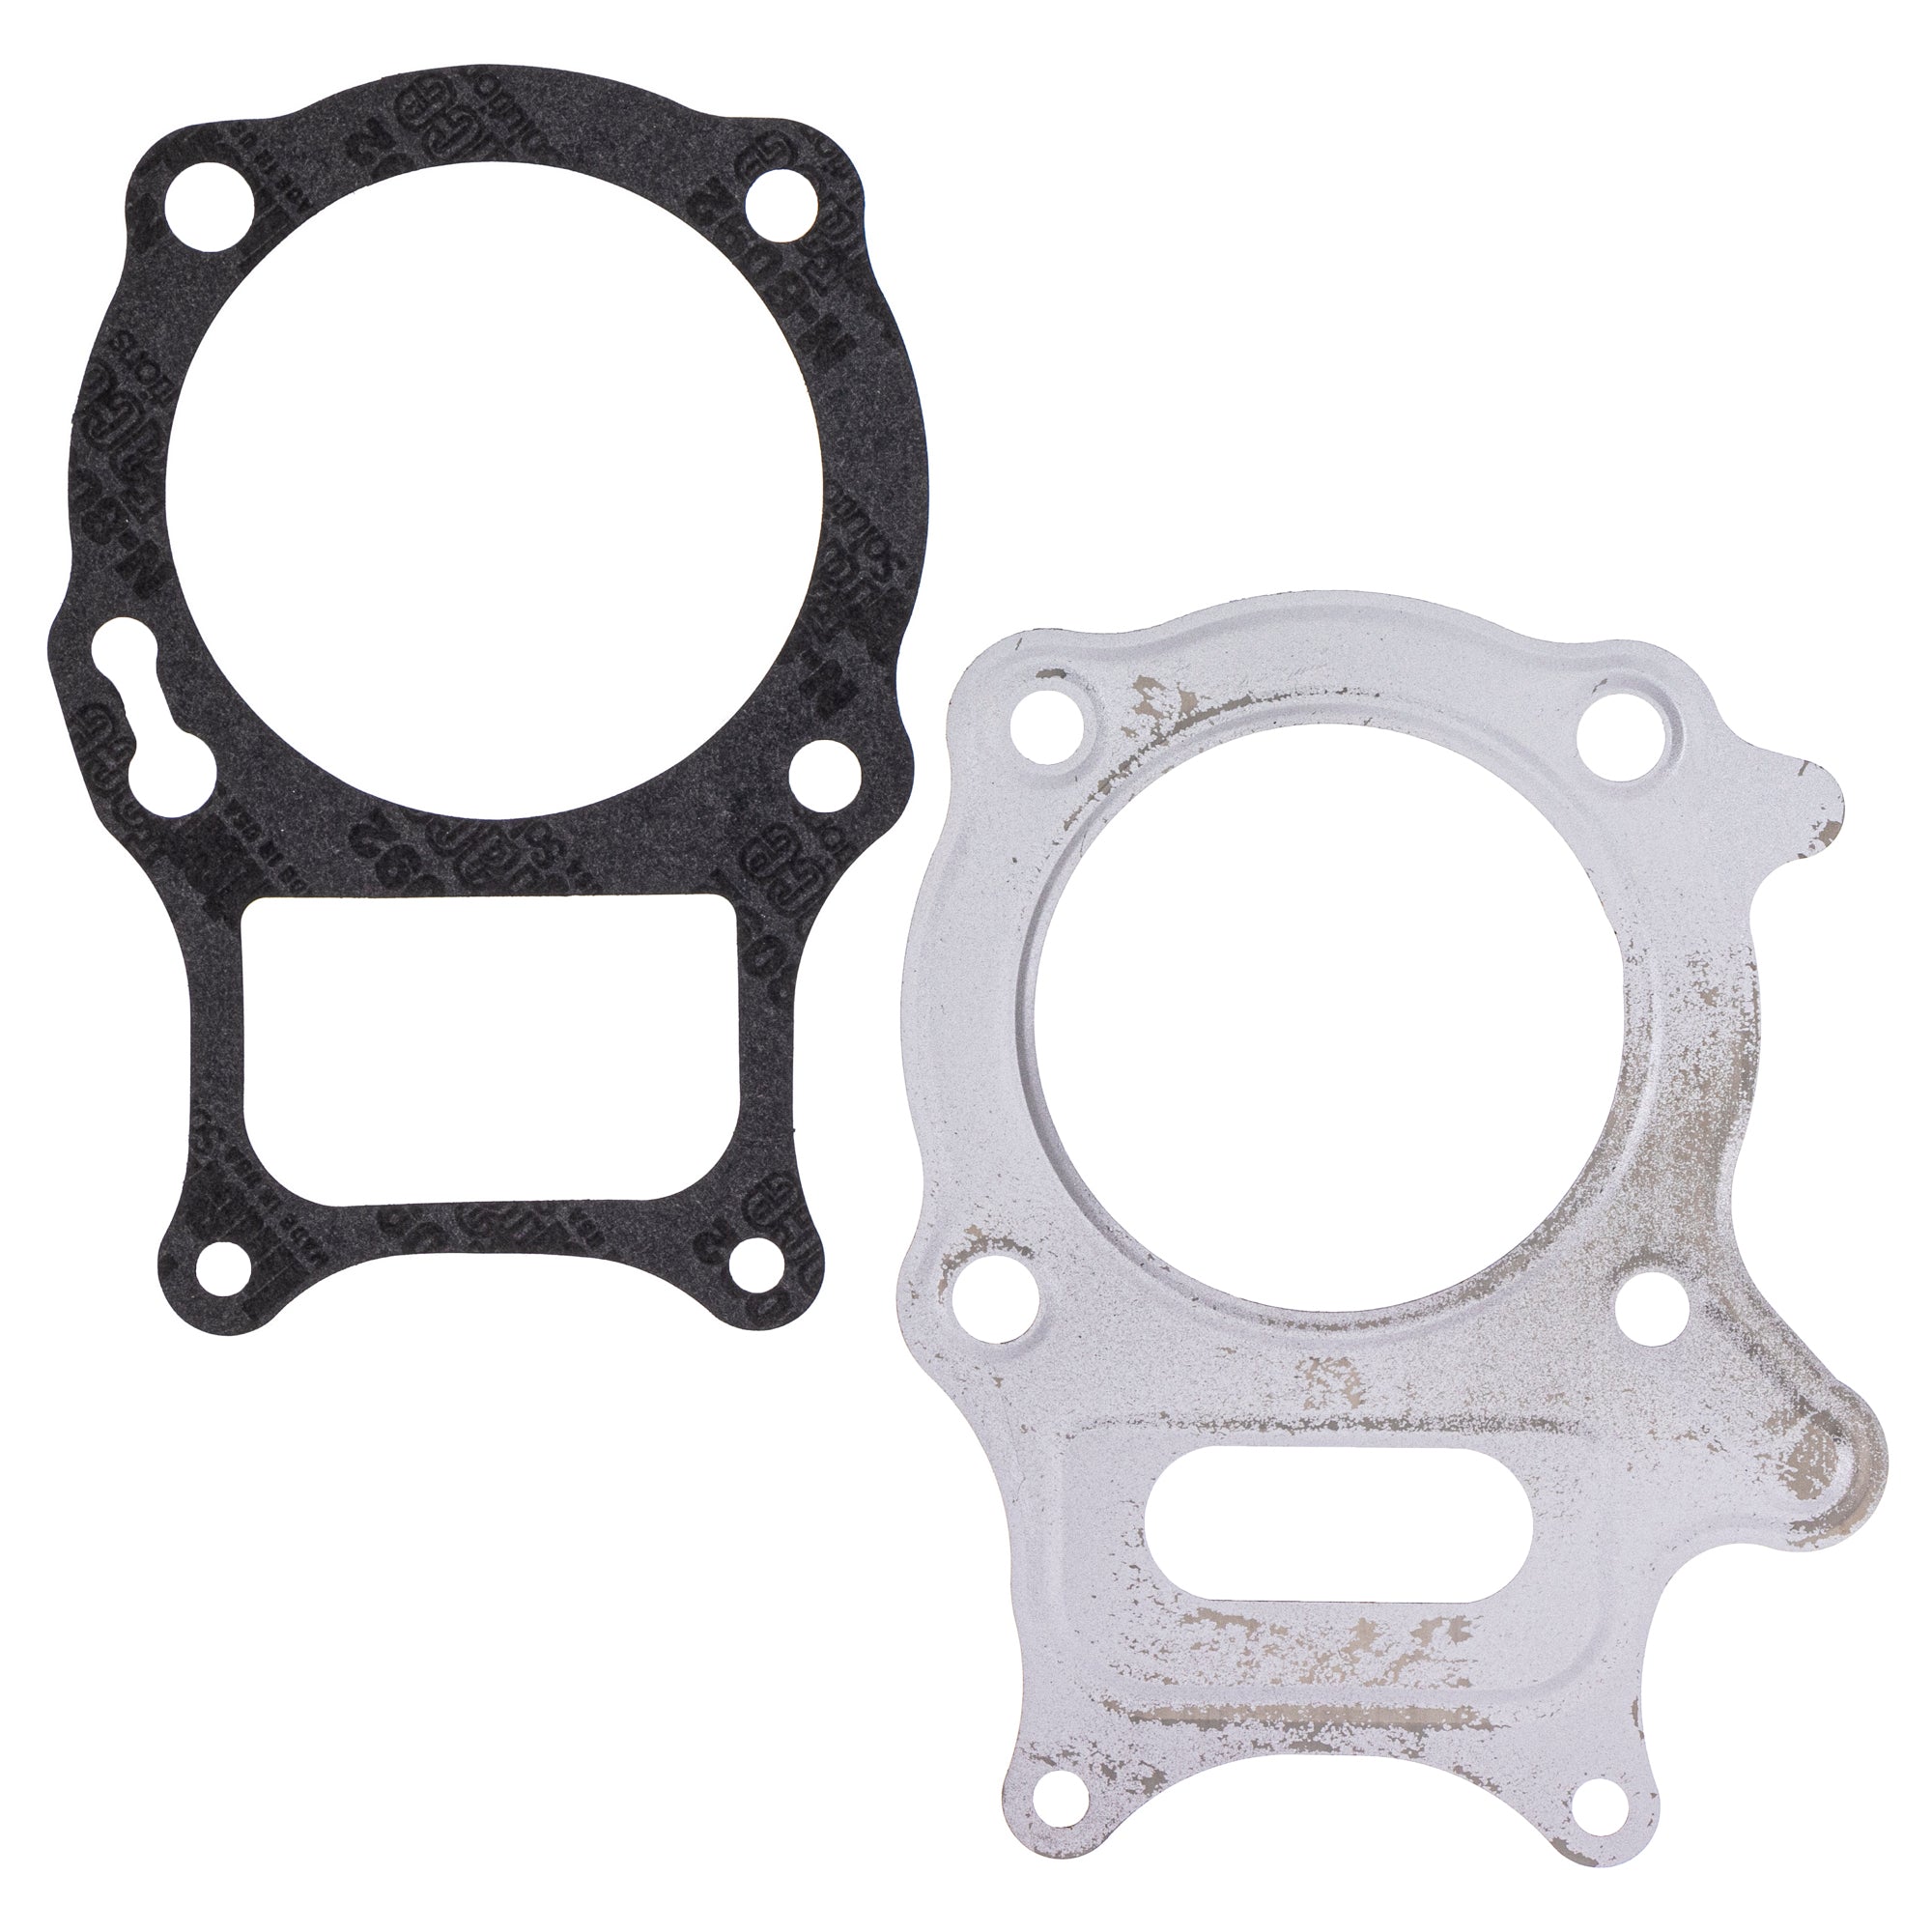 Cylinder Wiseco Piston Gasket Kit for Honda Recon 250 Sportrax 250